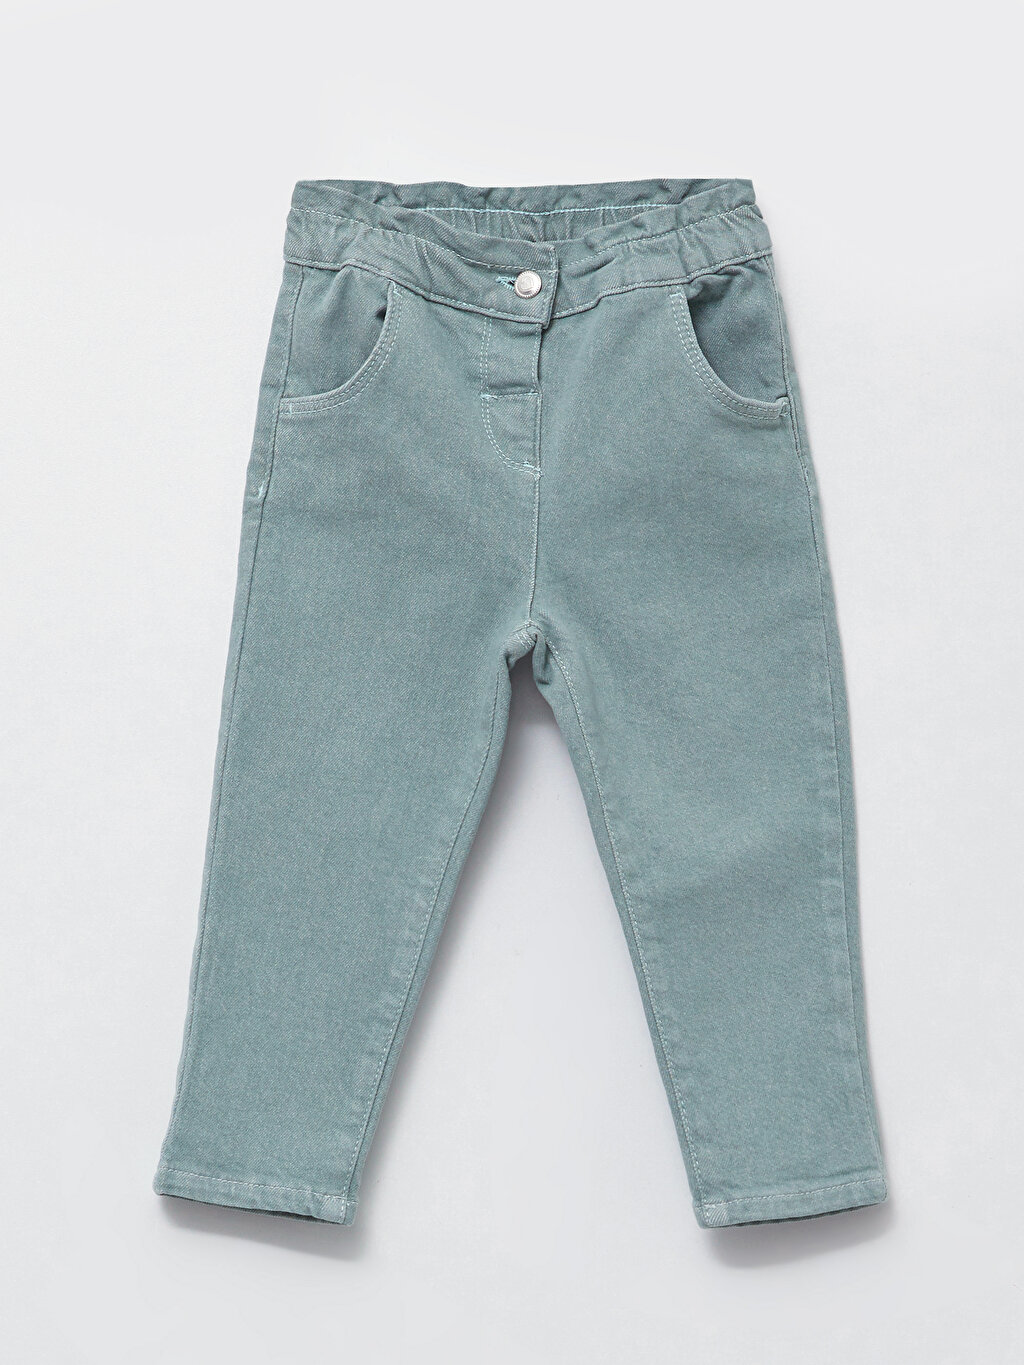 Trousers ~ 3 Months to 6 Years Girls Elastic Waist Denim Jeans Babies 